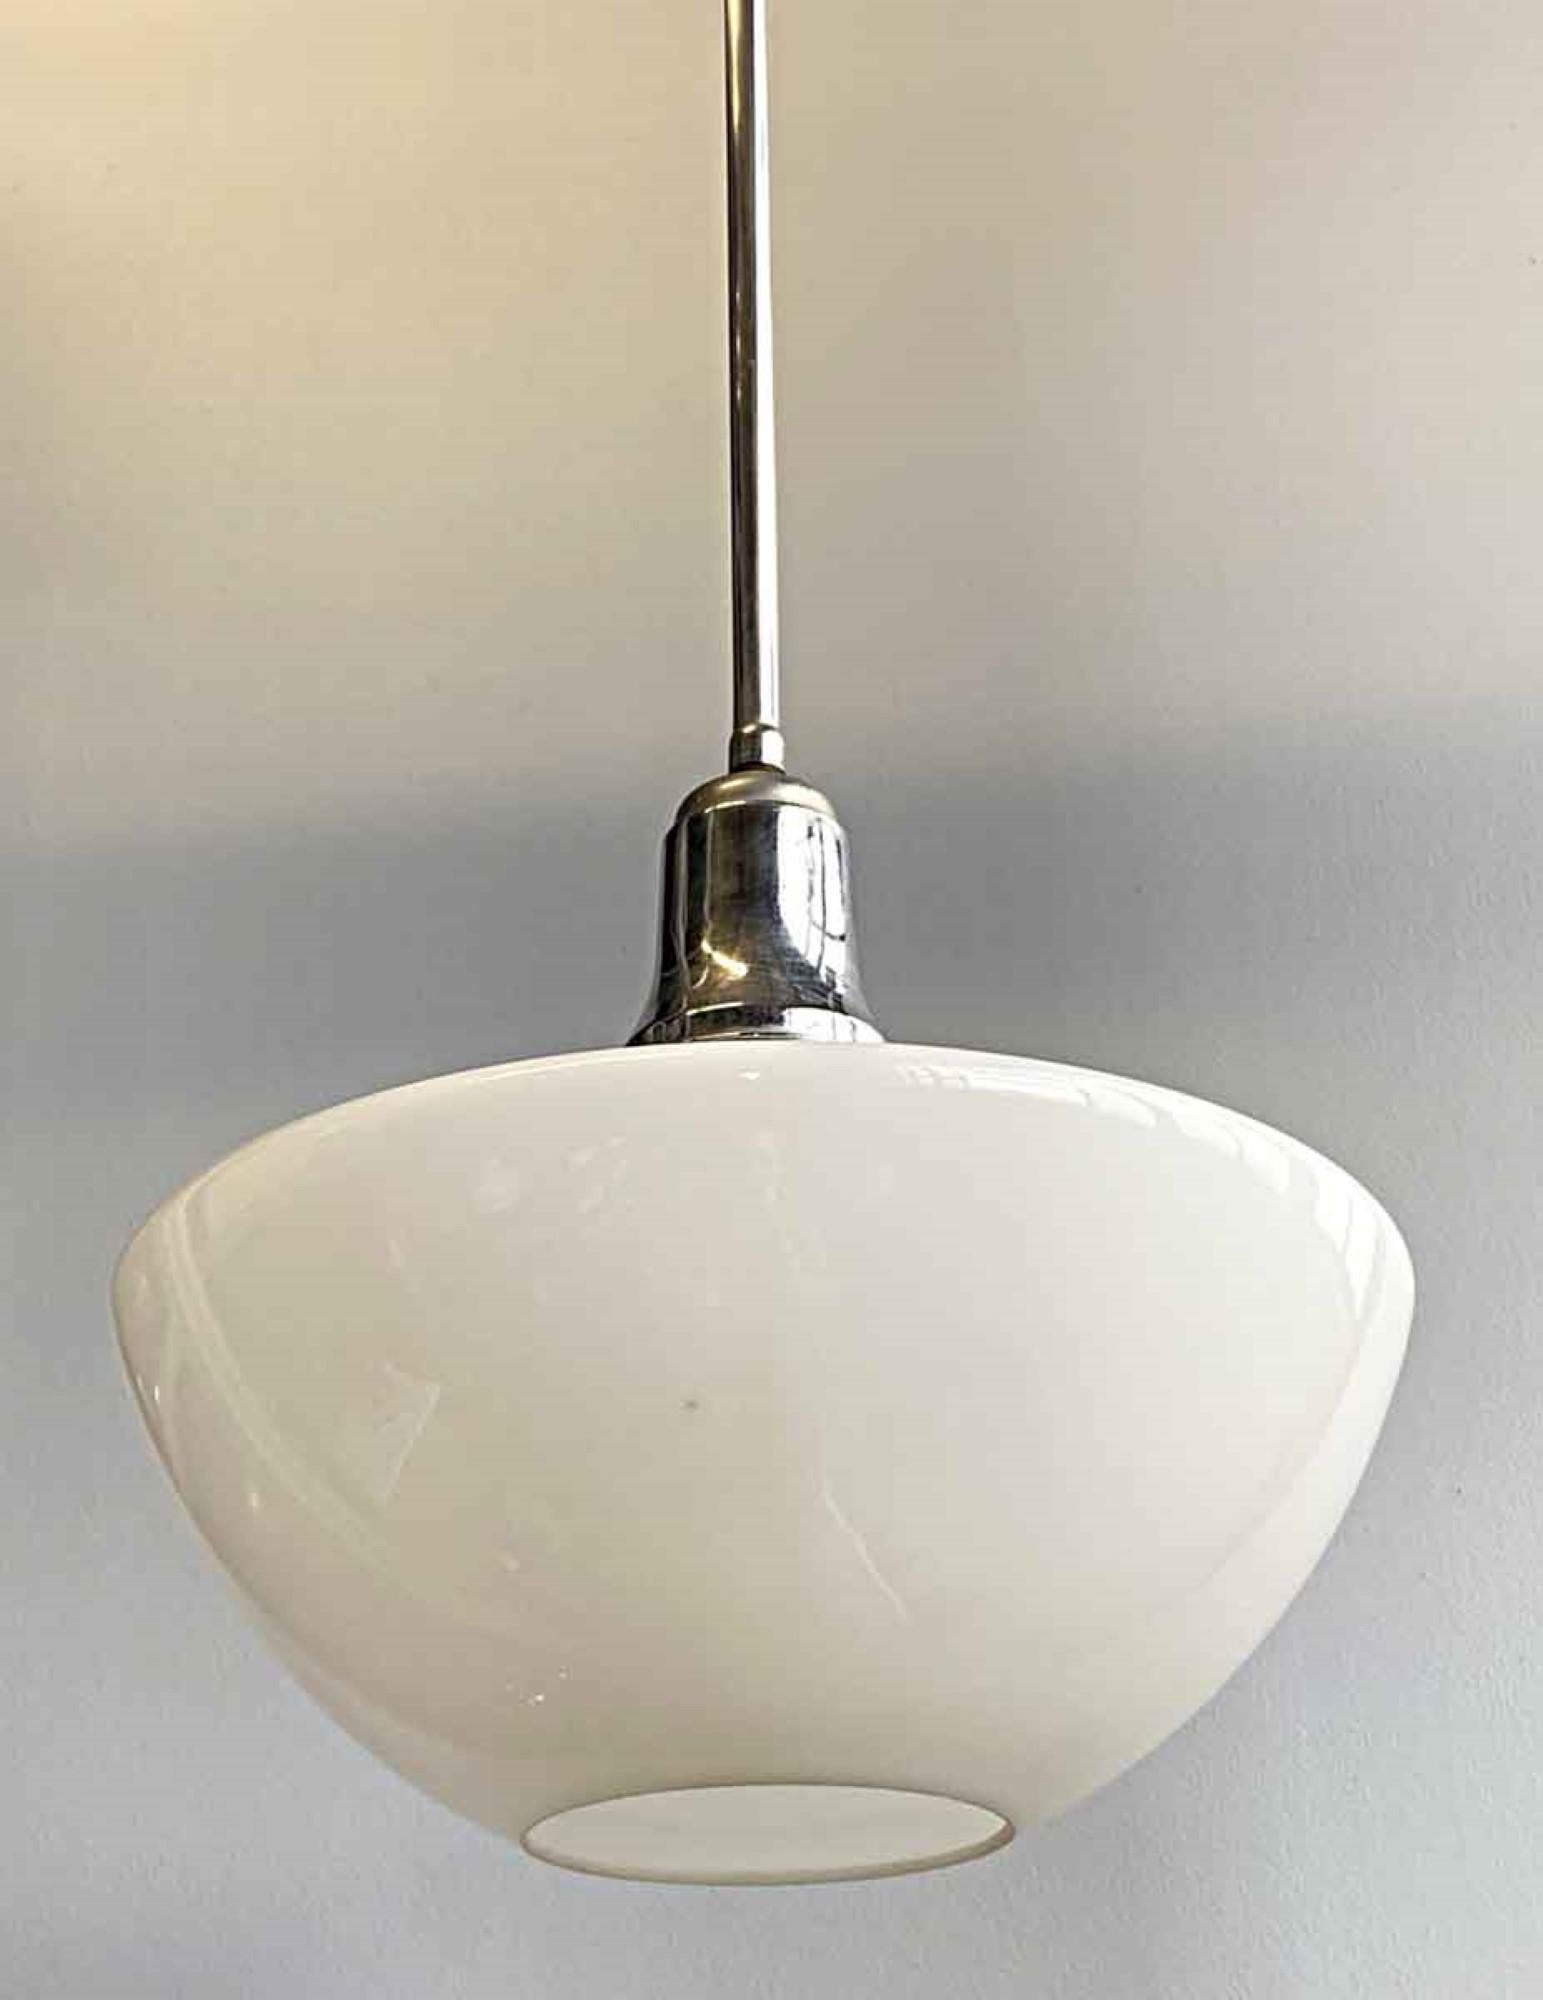 1960s Mid-Century Modern white milk glass globe with rare down light shaped shade. This pendant light comes with the original nickel plated brass pole fitter. This can be seen at our 333 West 52nd St location in the Theater District West of